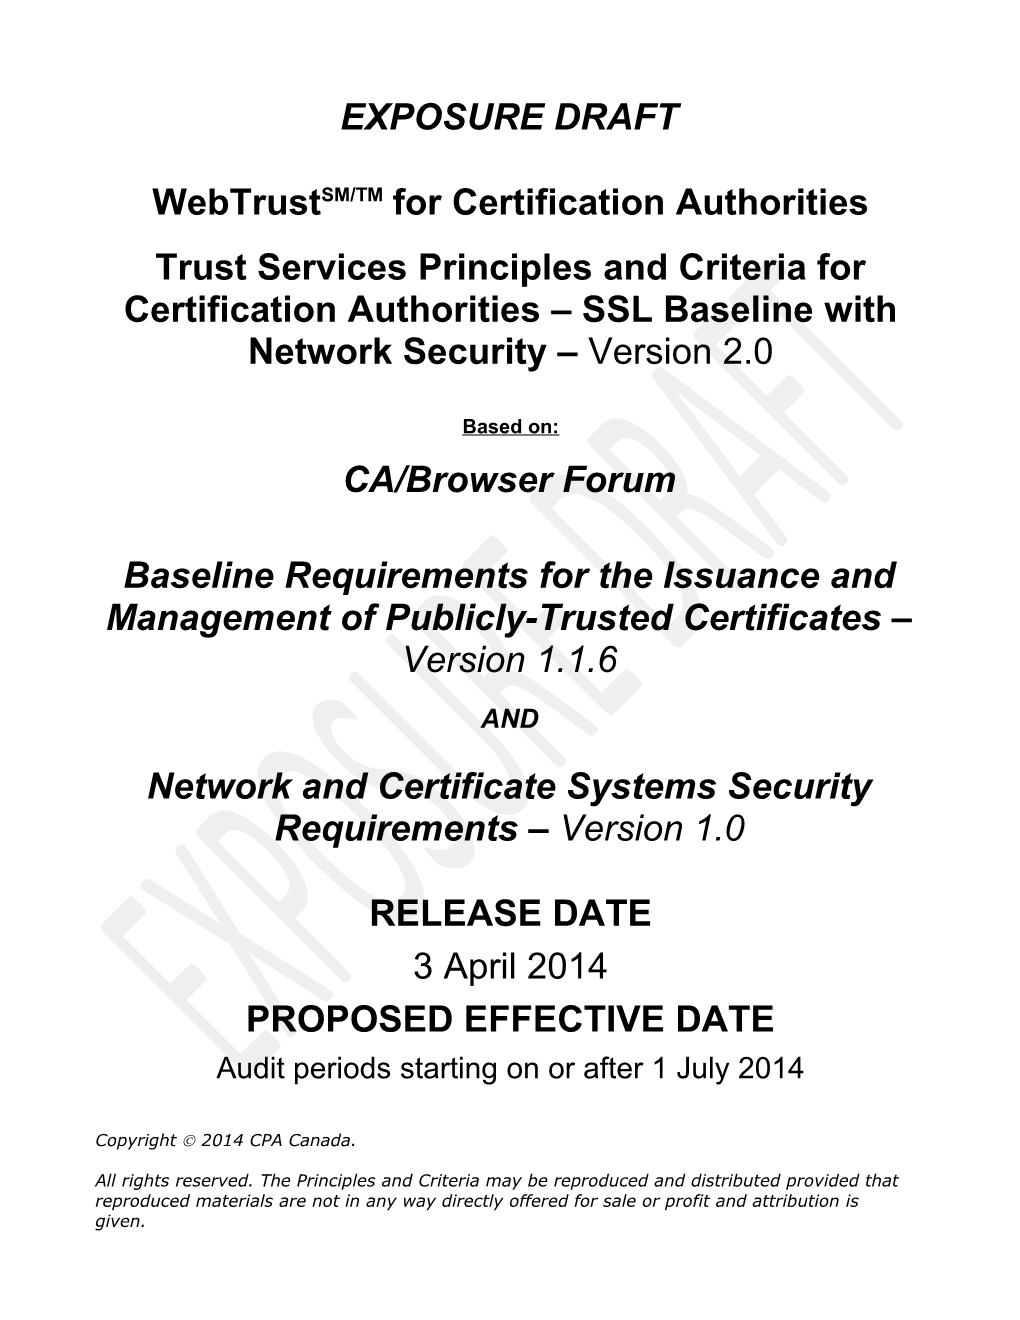 Webtrust for Certification Authorities Trust Services Principles and Criteria for Certification